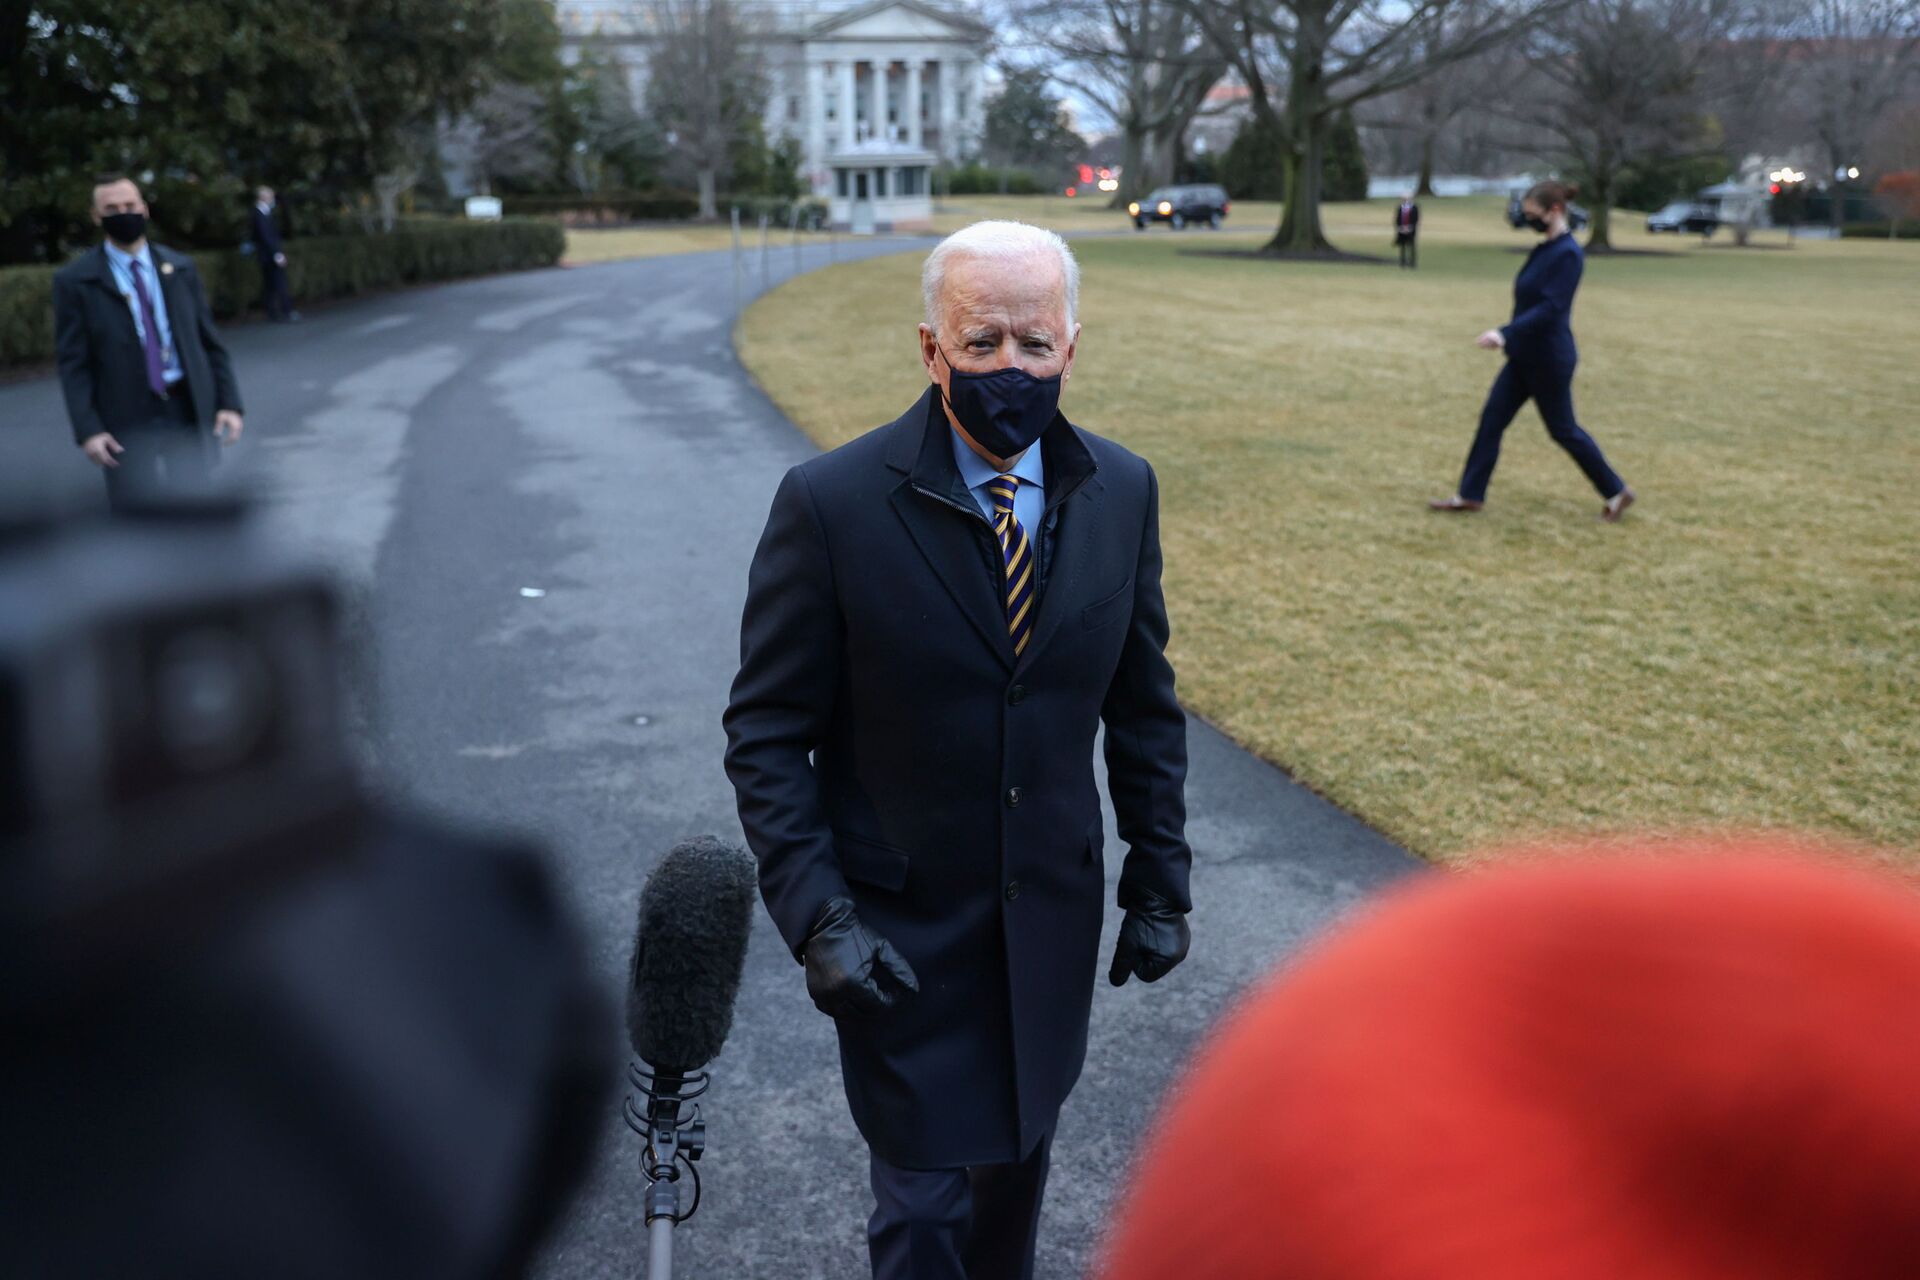  ‘And Here You Are, Talking About Him’: Netizens Weigh in on Biden Being 'Tired of Trump' - Sputnik International, 1920, 17.02.2021